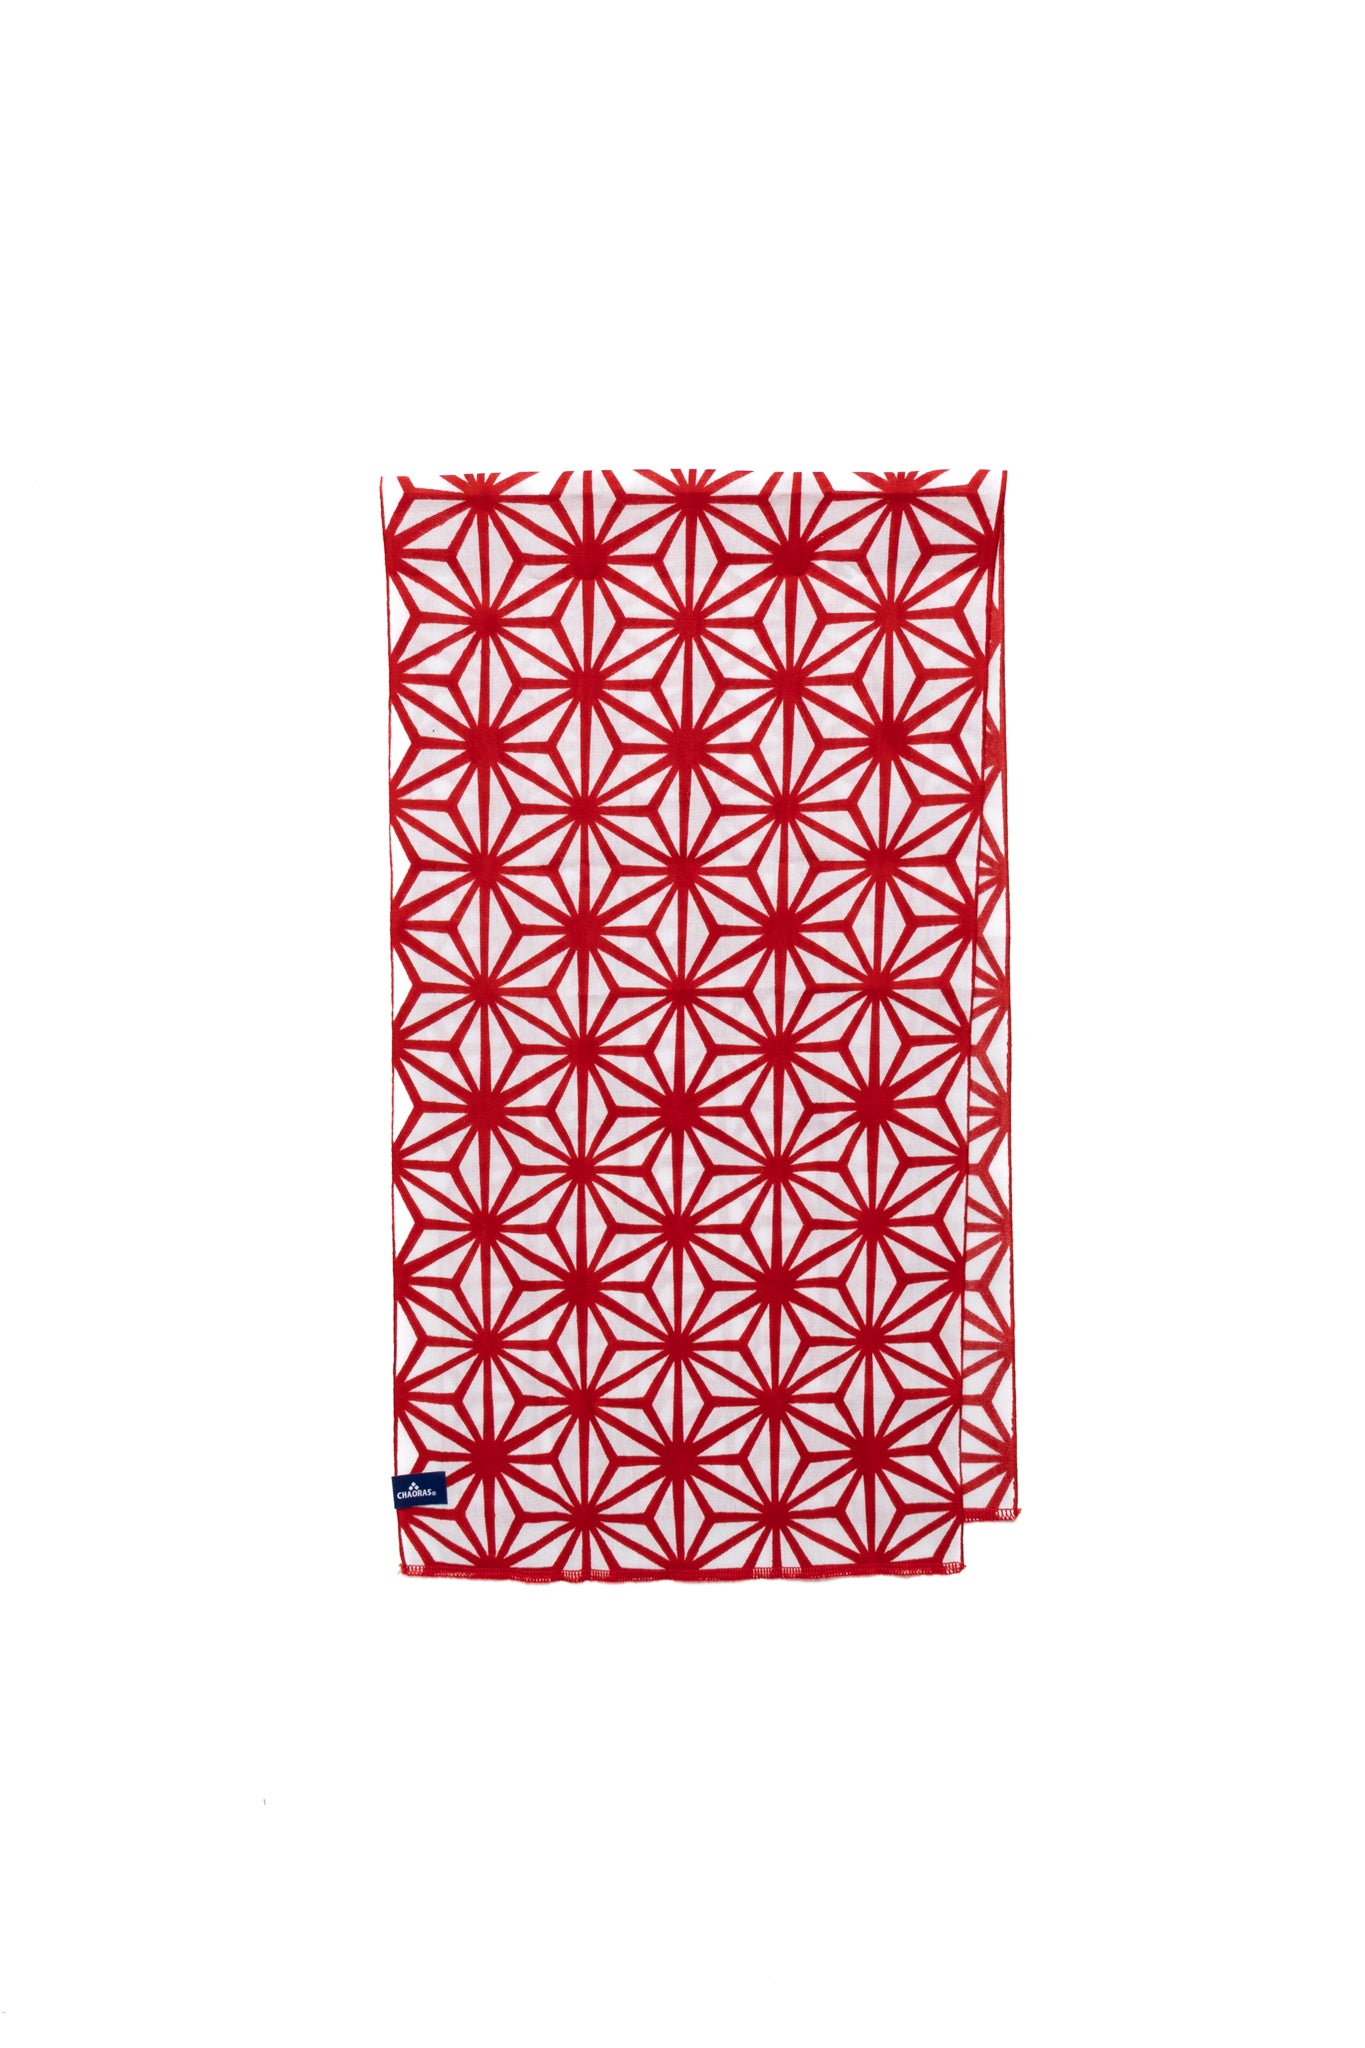 CHAORAS Hand Towel - Red (Hemp Leaf Red and White)